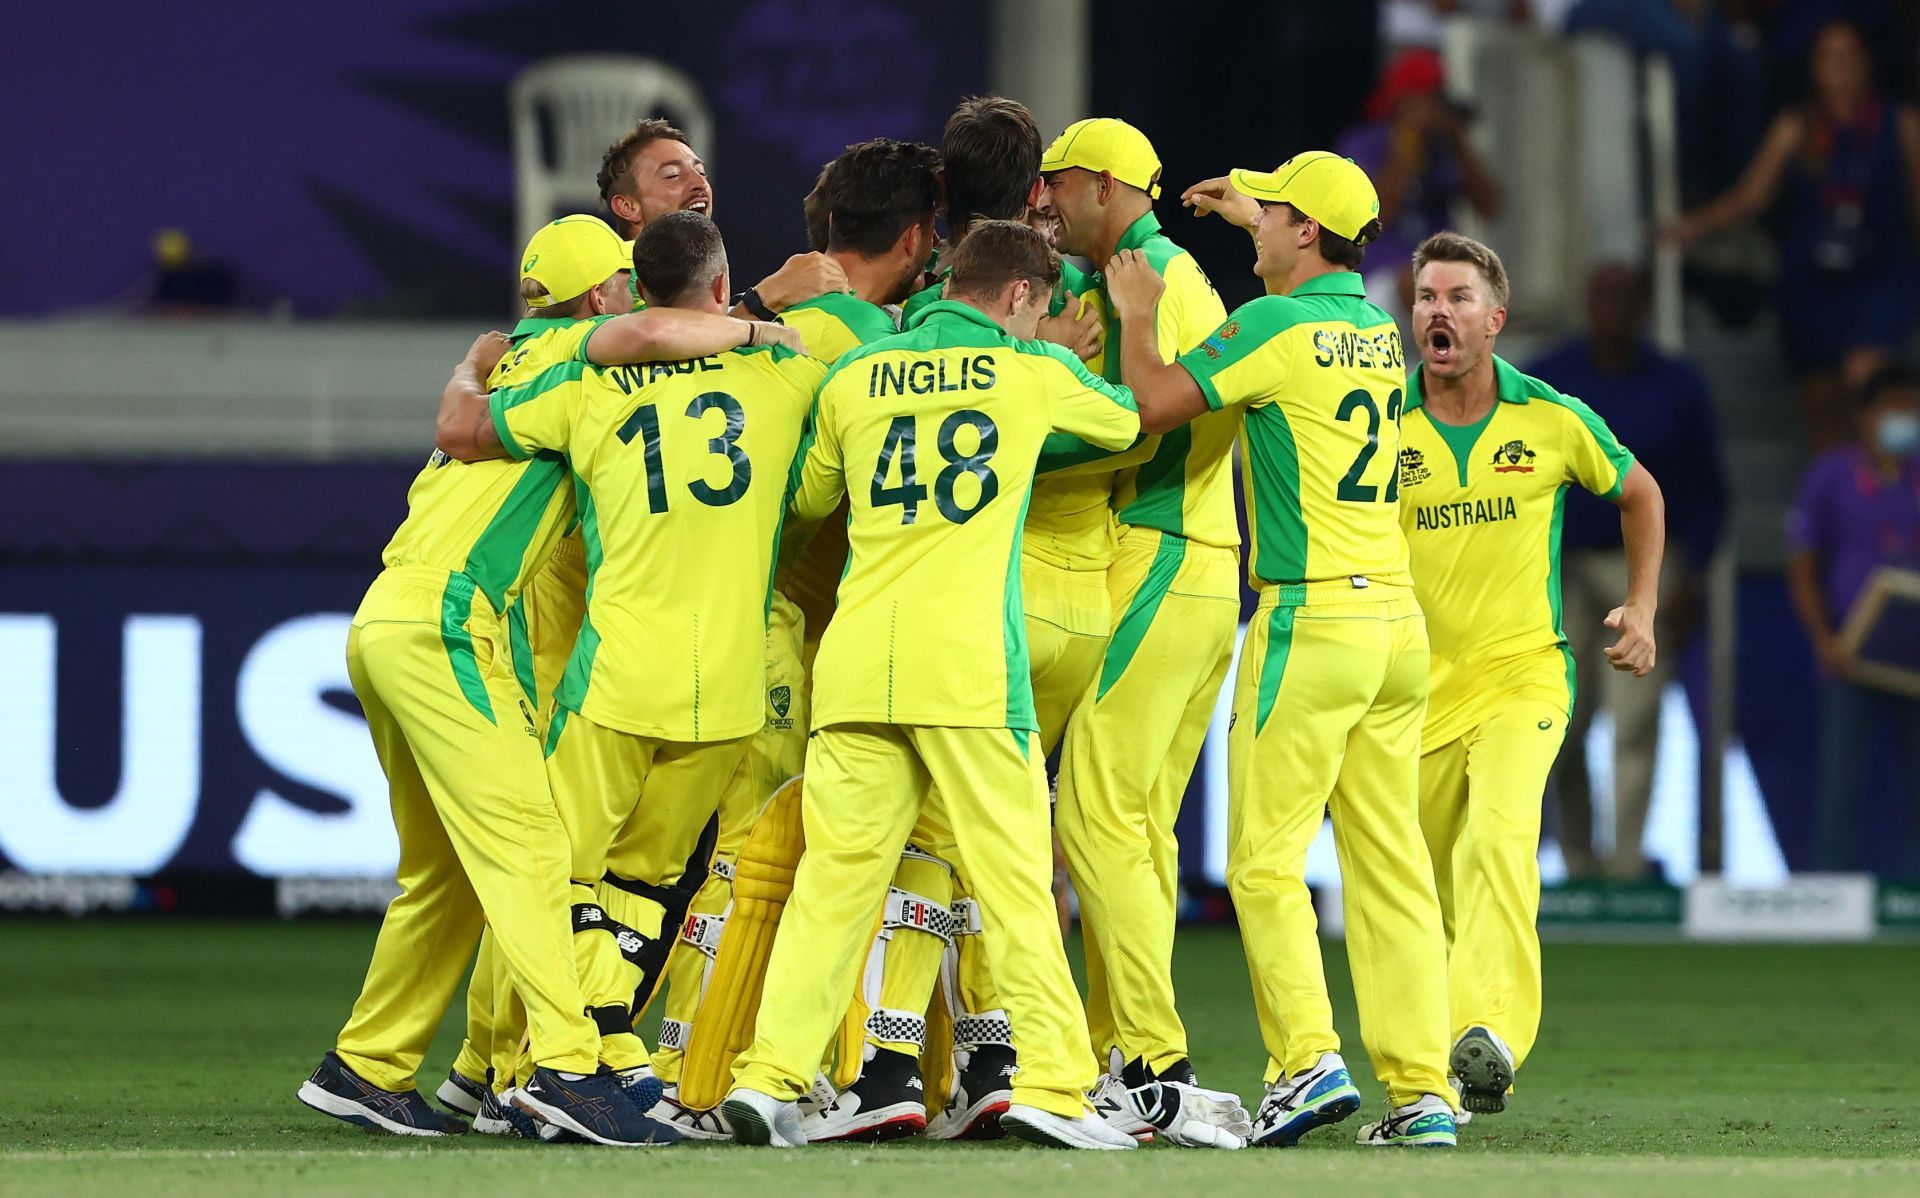 Australian players celebrate after winning the T20 World Cup 2021 final. Pic: Getty Images